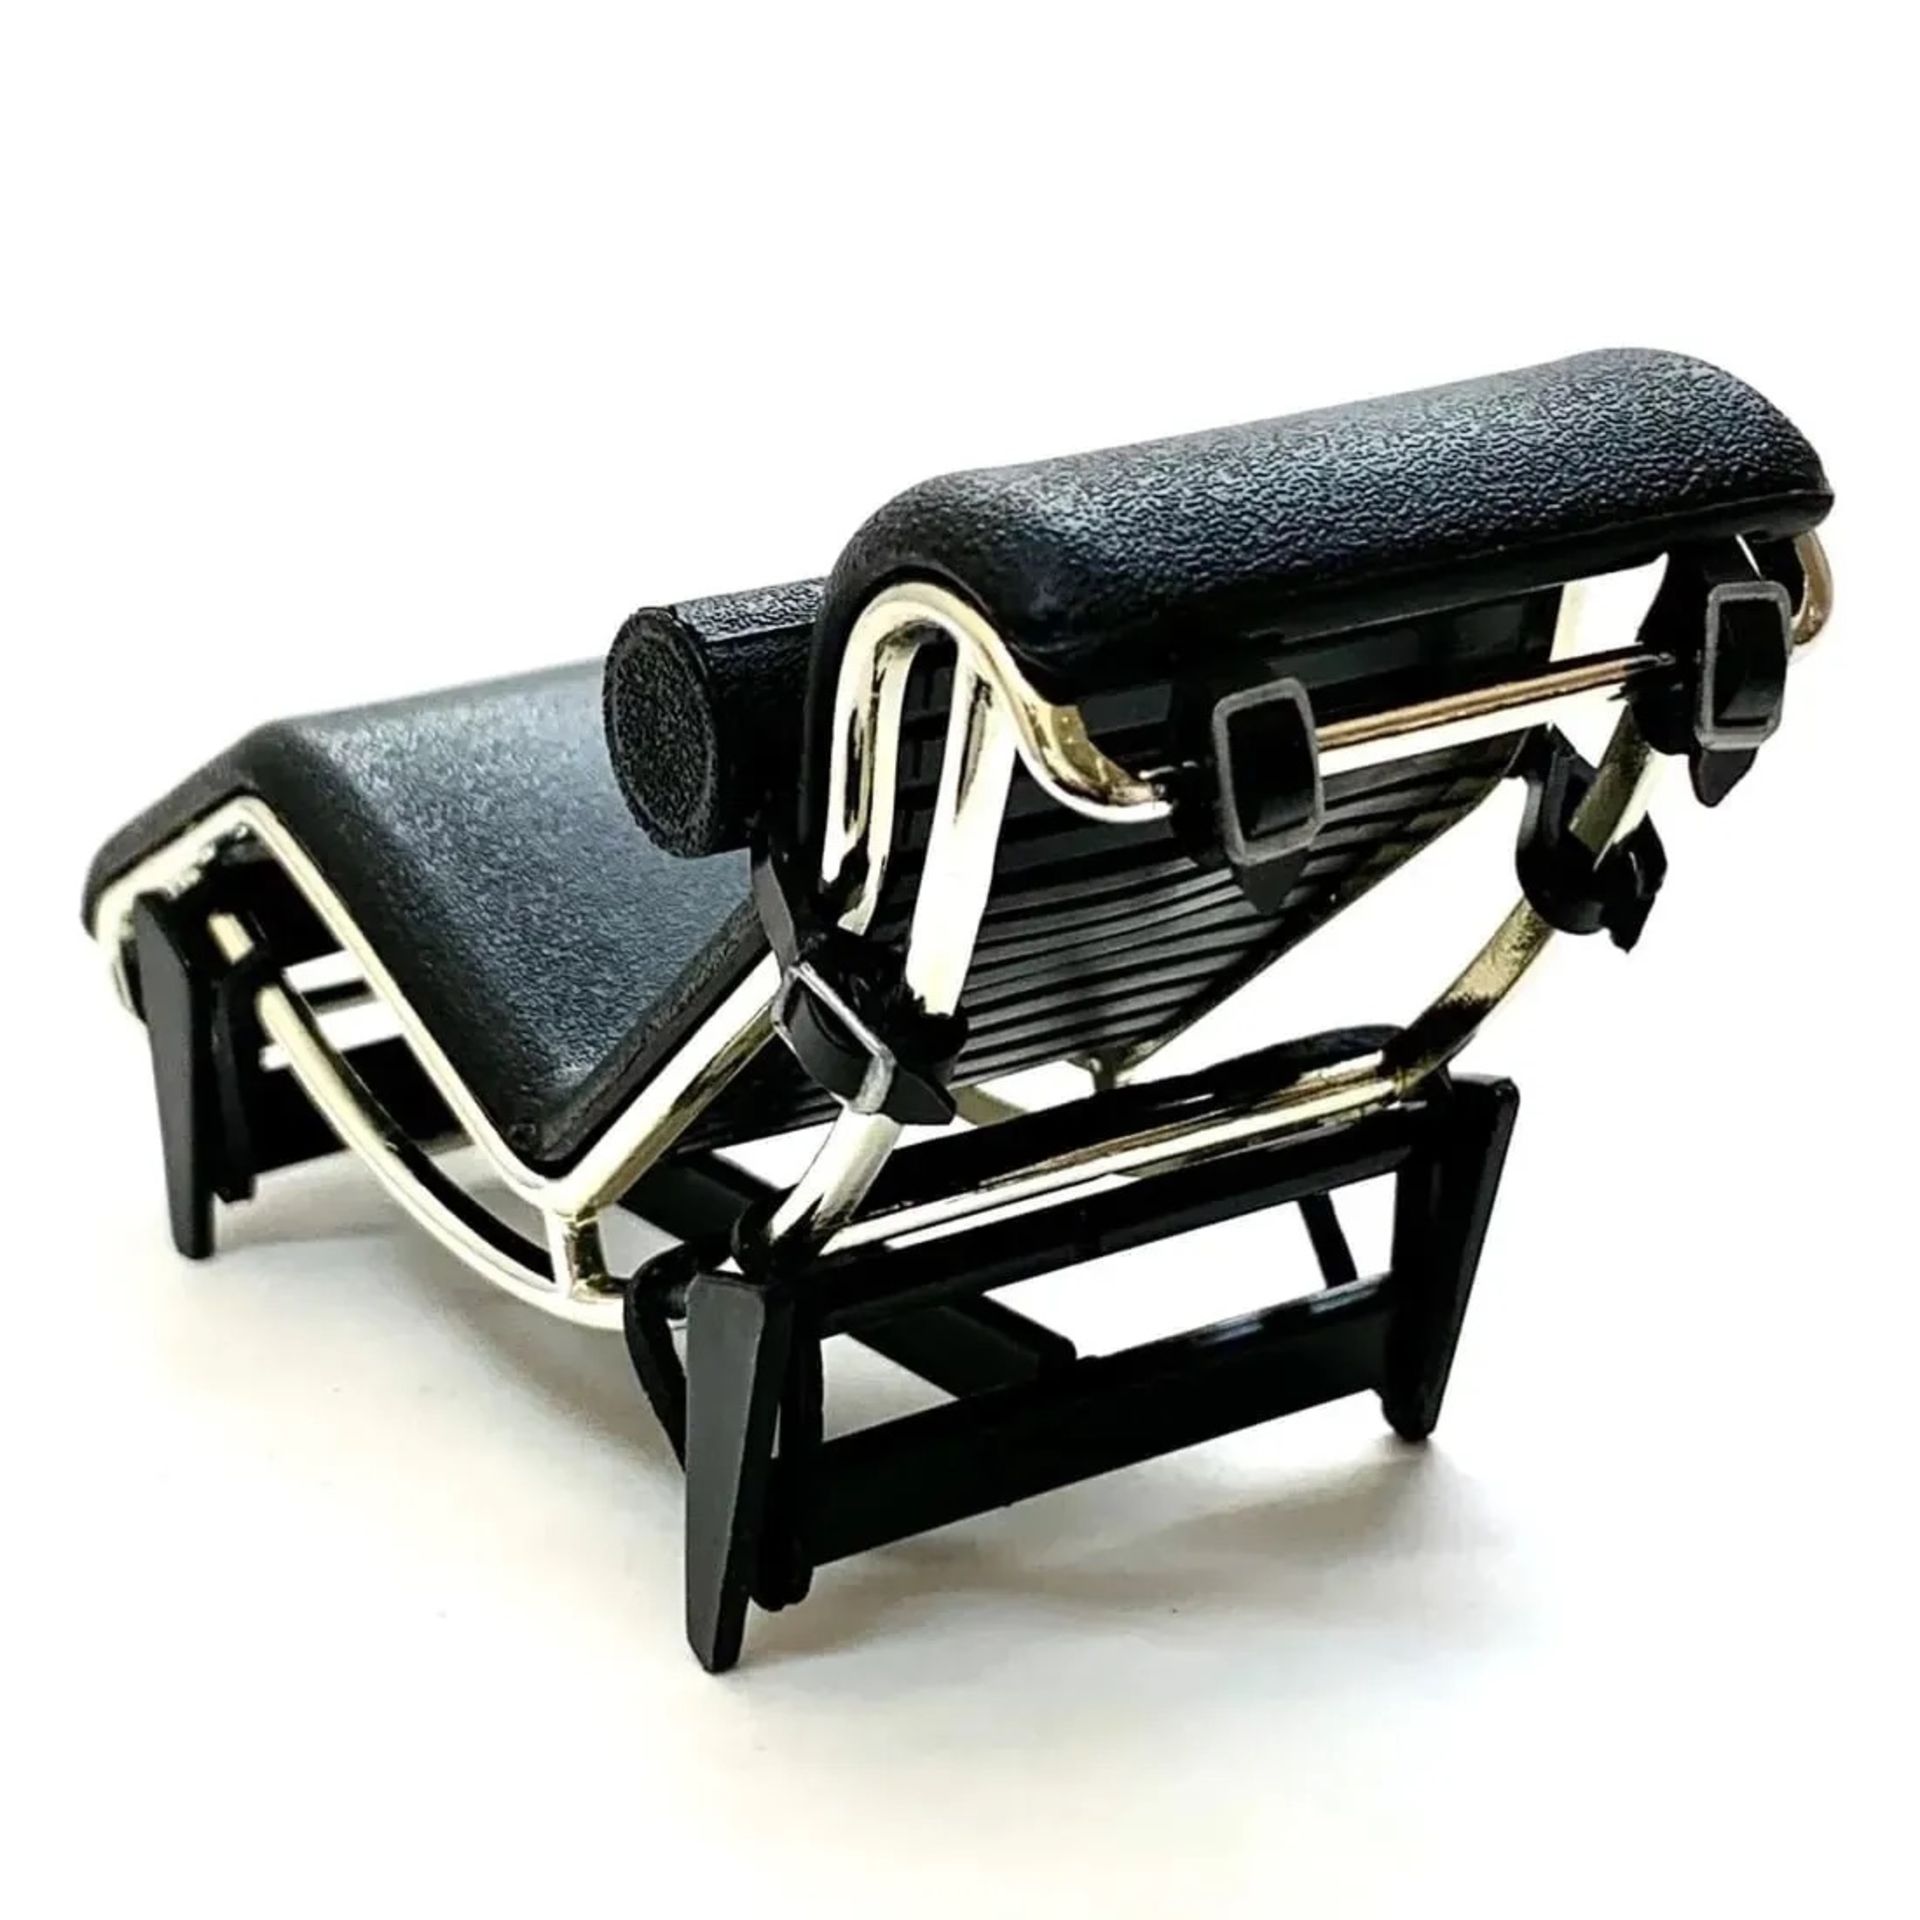 Le Corbusier LC4 Chaise Lounger Desk Display - Image 4 of 4